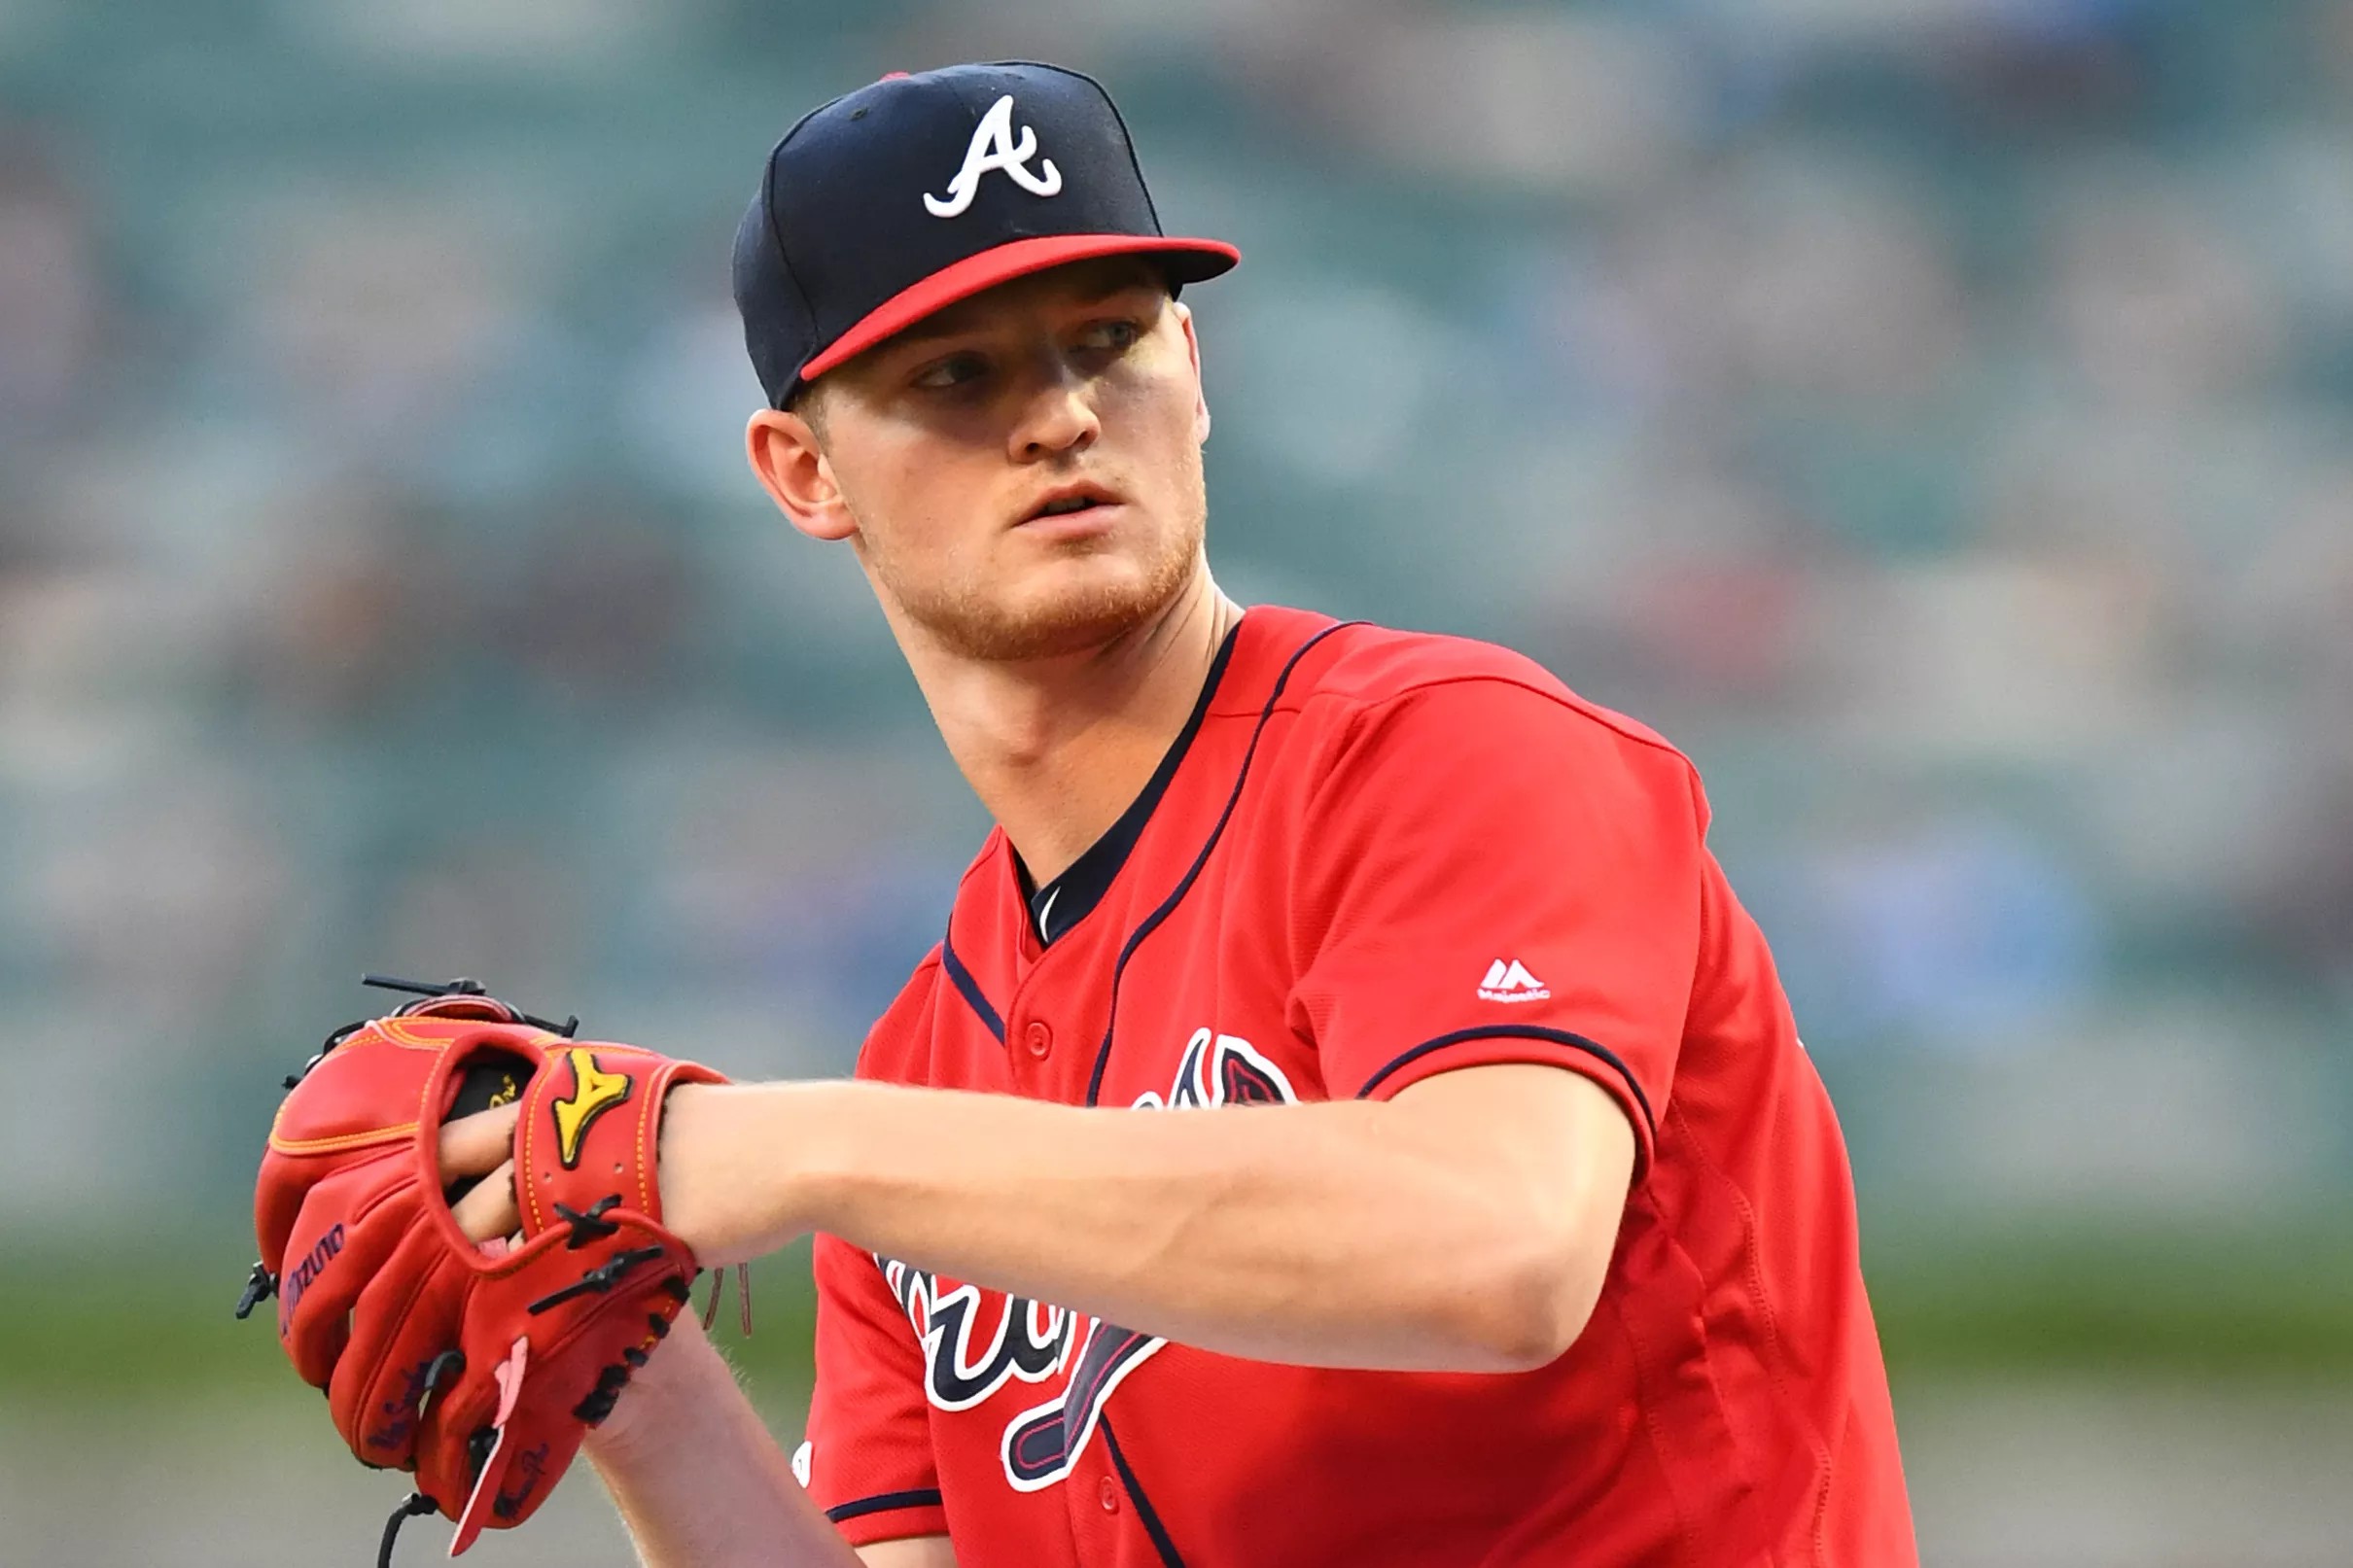 Mike Soroka finishes second in NL Rookie of the Year voting